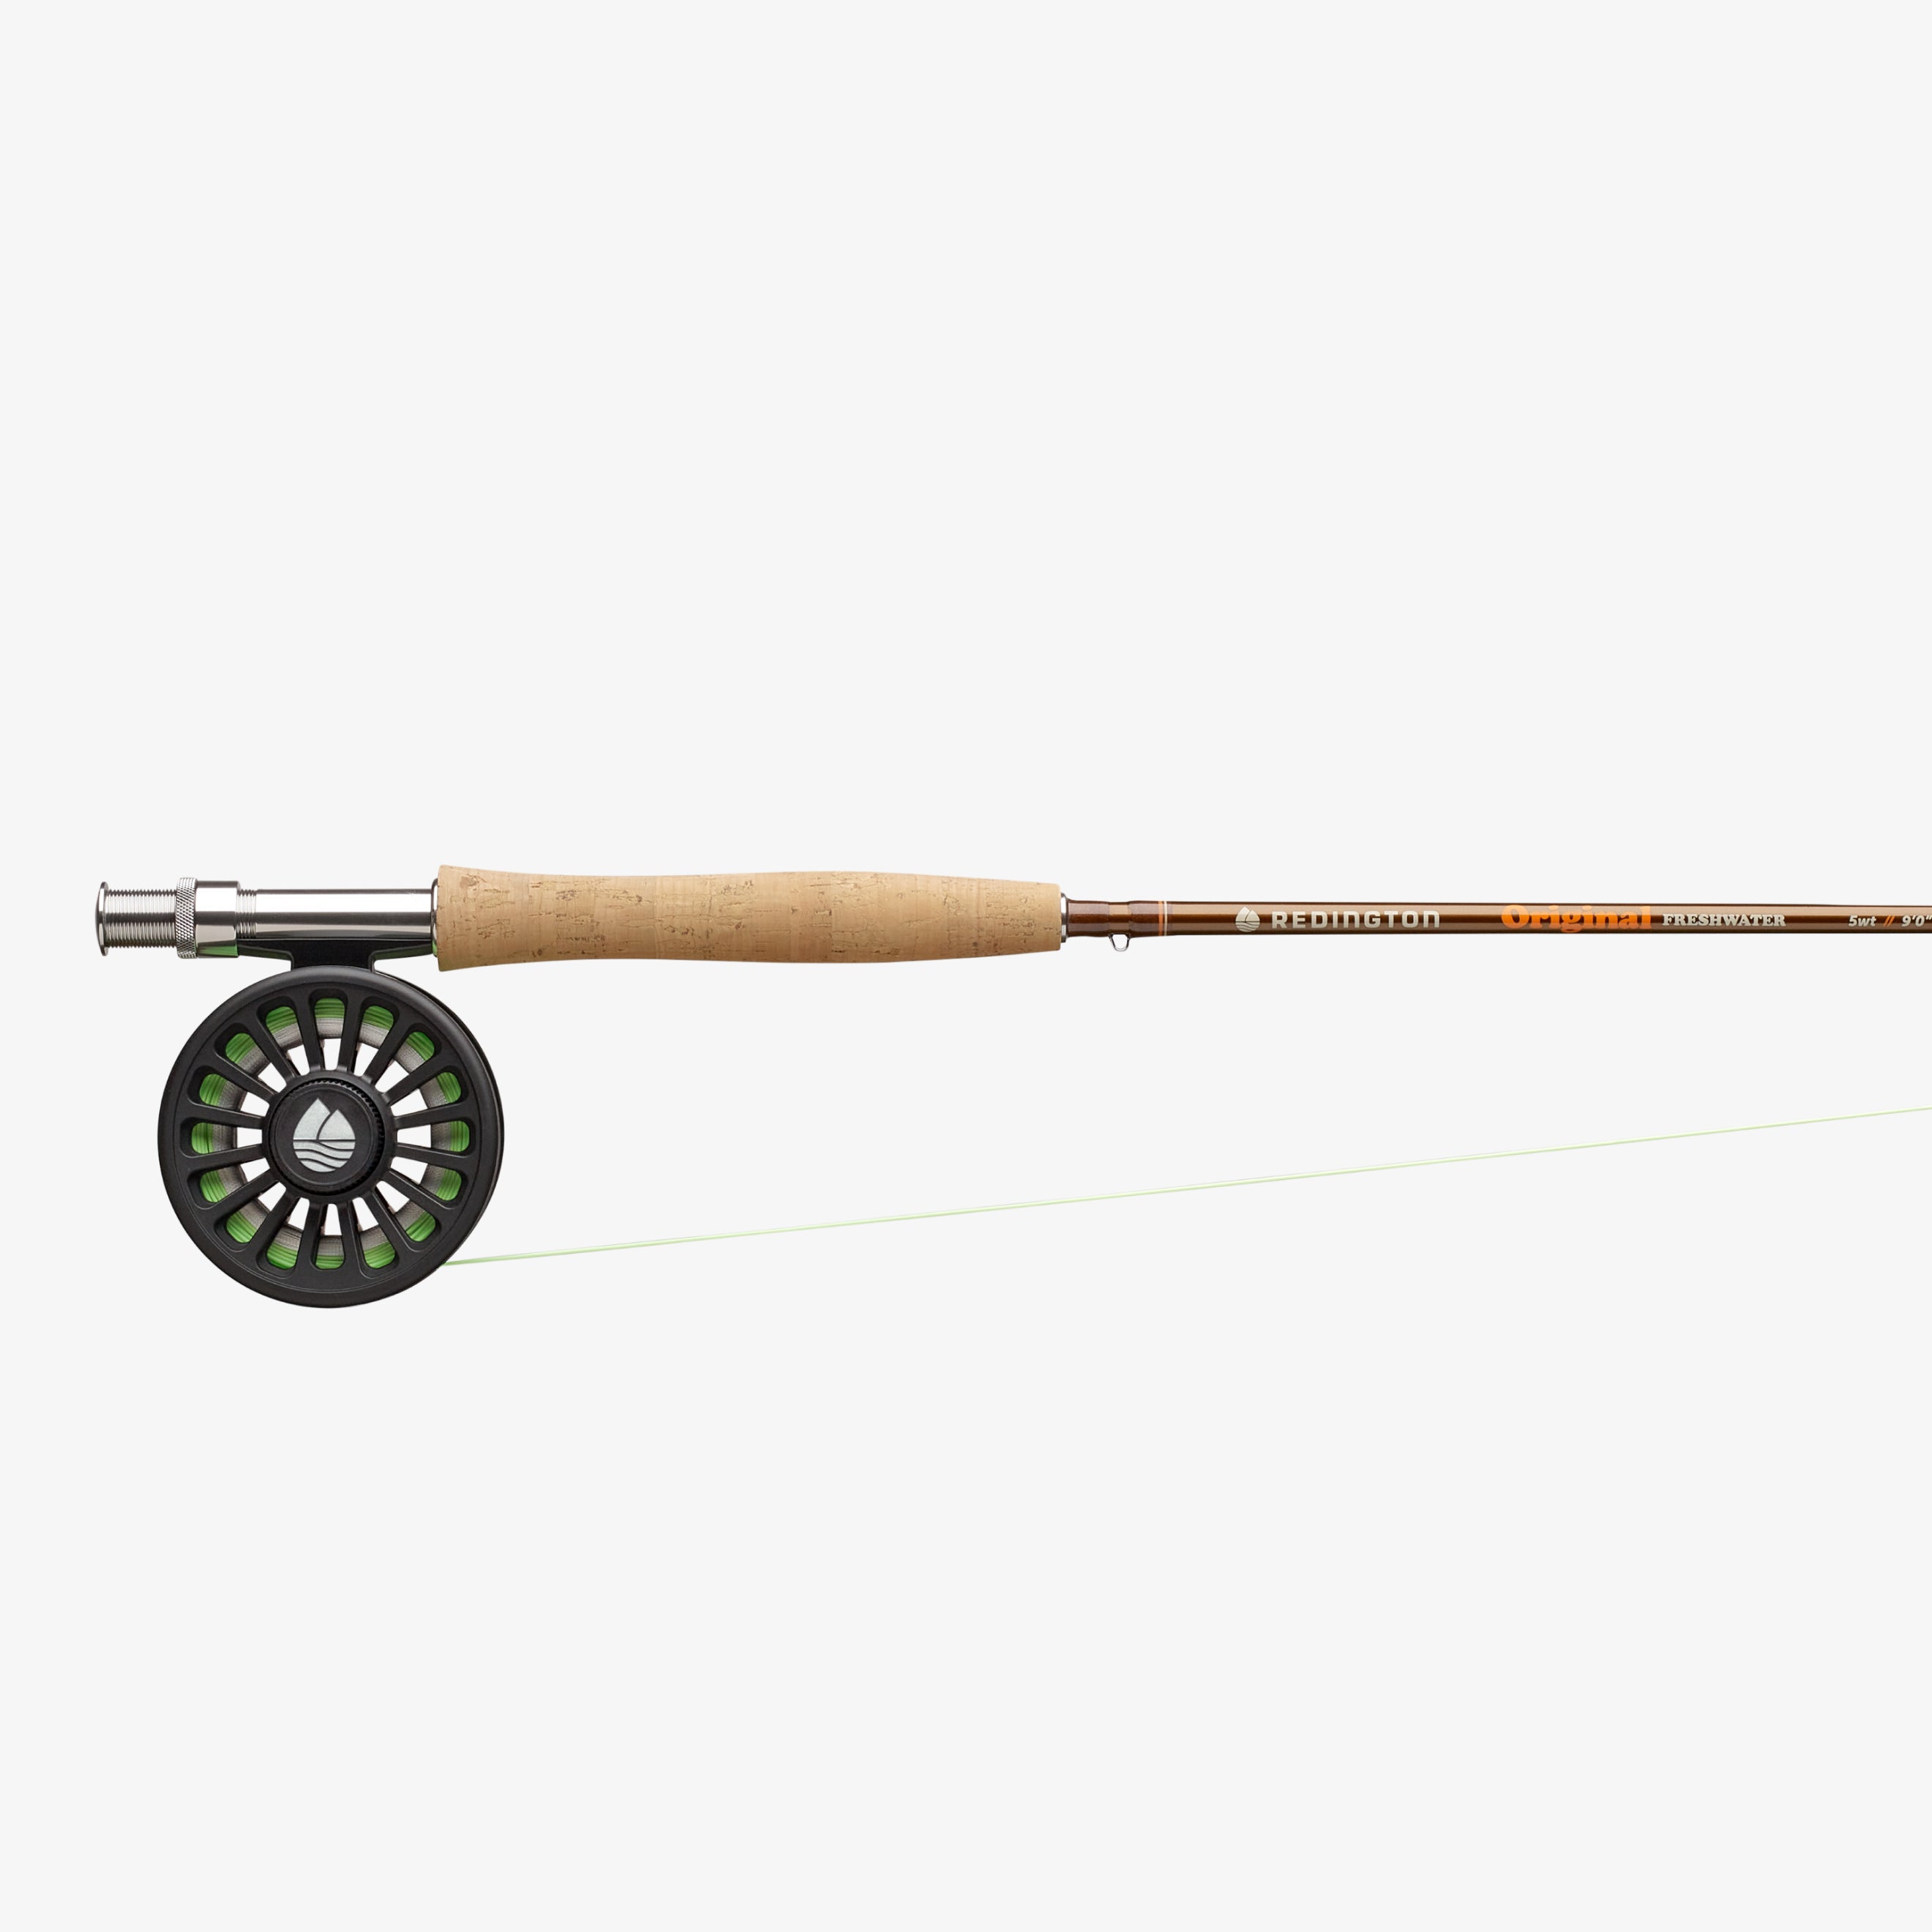 Redington Fly Fishing Combo Kit 590-4 Vice Outfit with I.D Reel 5 Wt 9-Foot  4pc, Rod & Reel Combos -  Canada